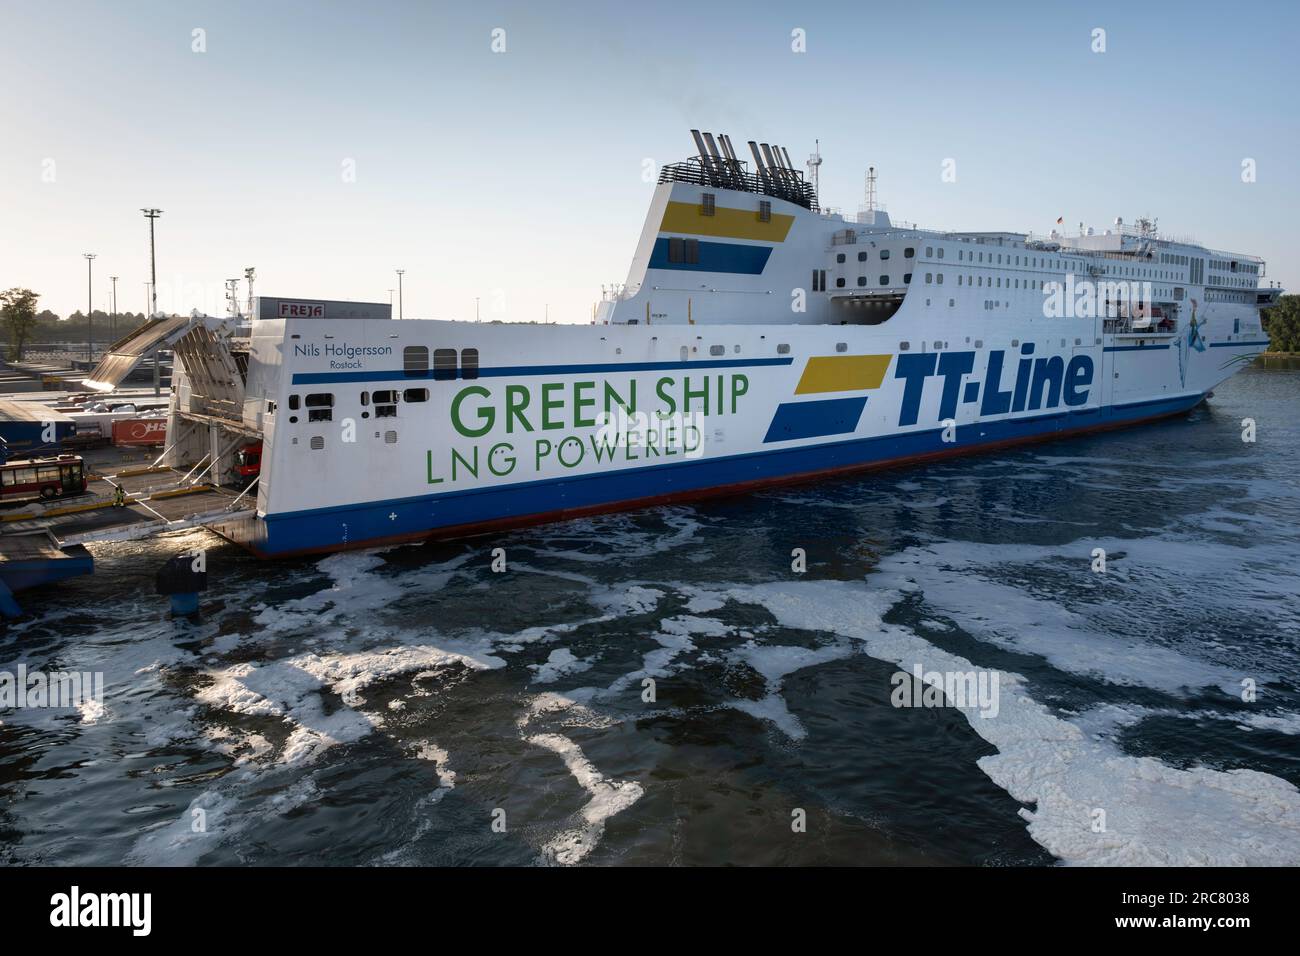 Trucks leave the Green ship TT-Line ferry NILS HOLGERSSON, LNG Powered, in the harbor of Travemünde Stock Photo